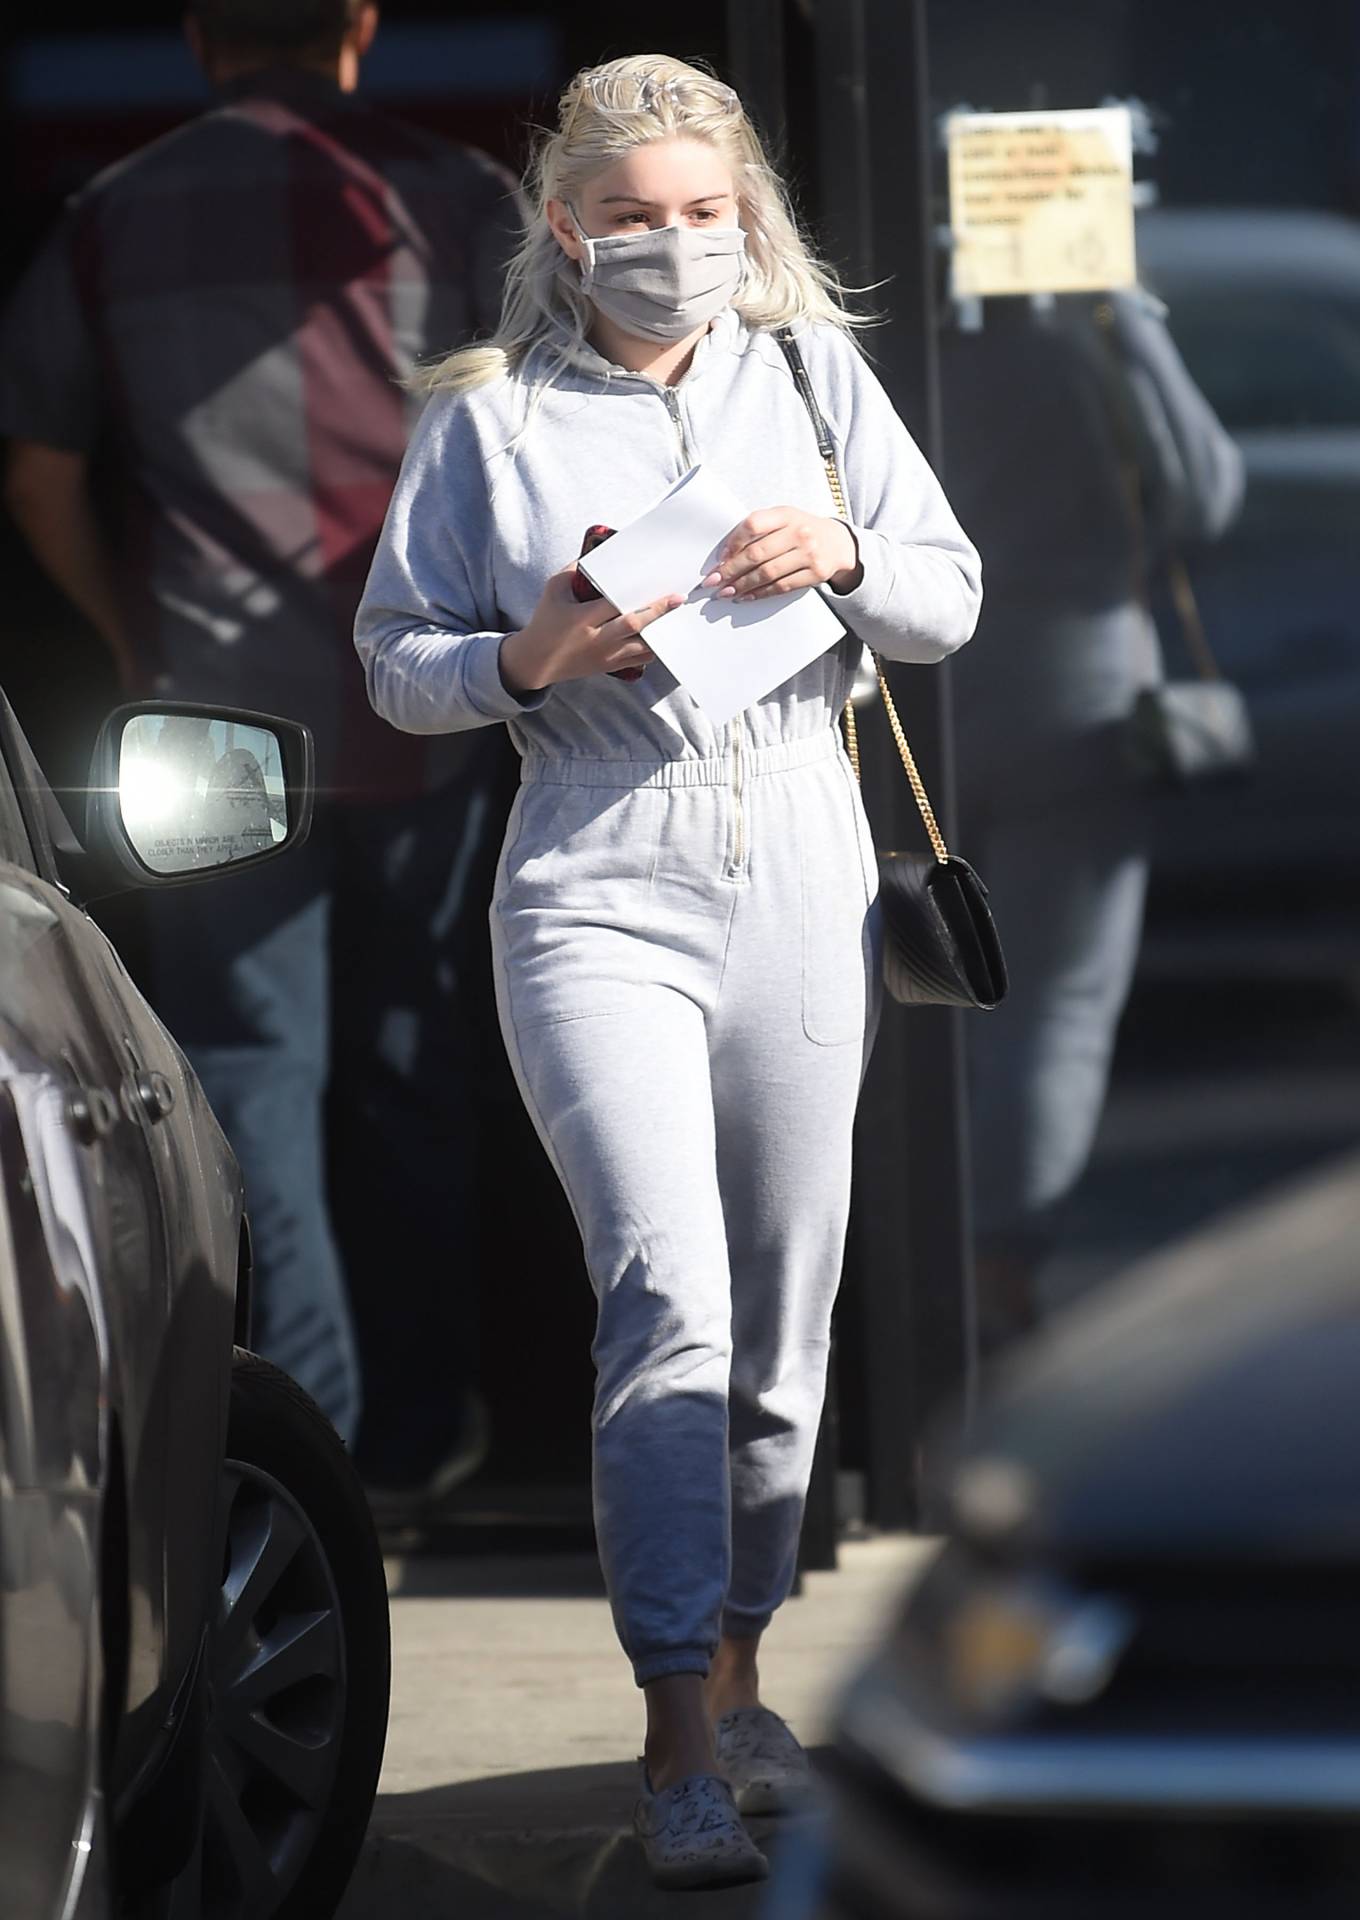 Ariel Winter - Spotted wearing a jumpsuit while out in Los Angeles